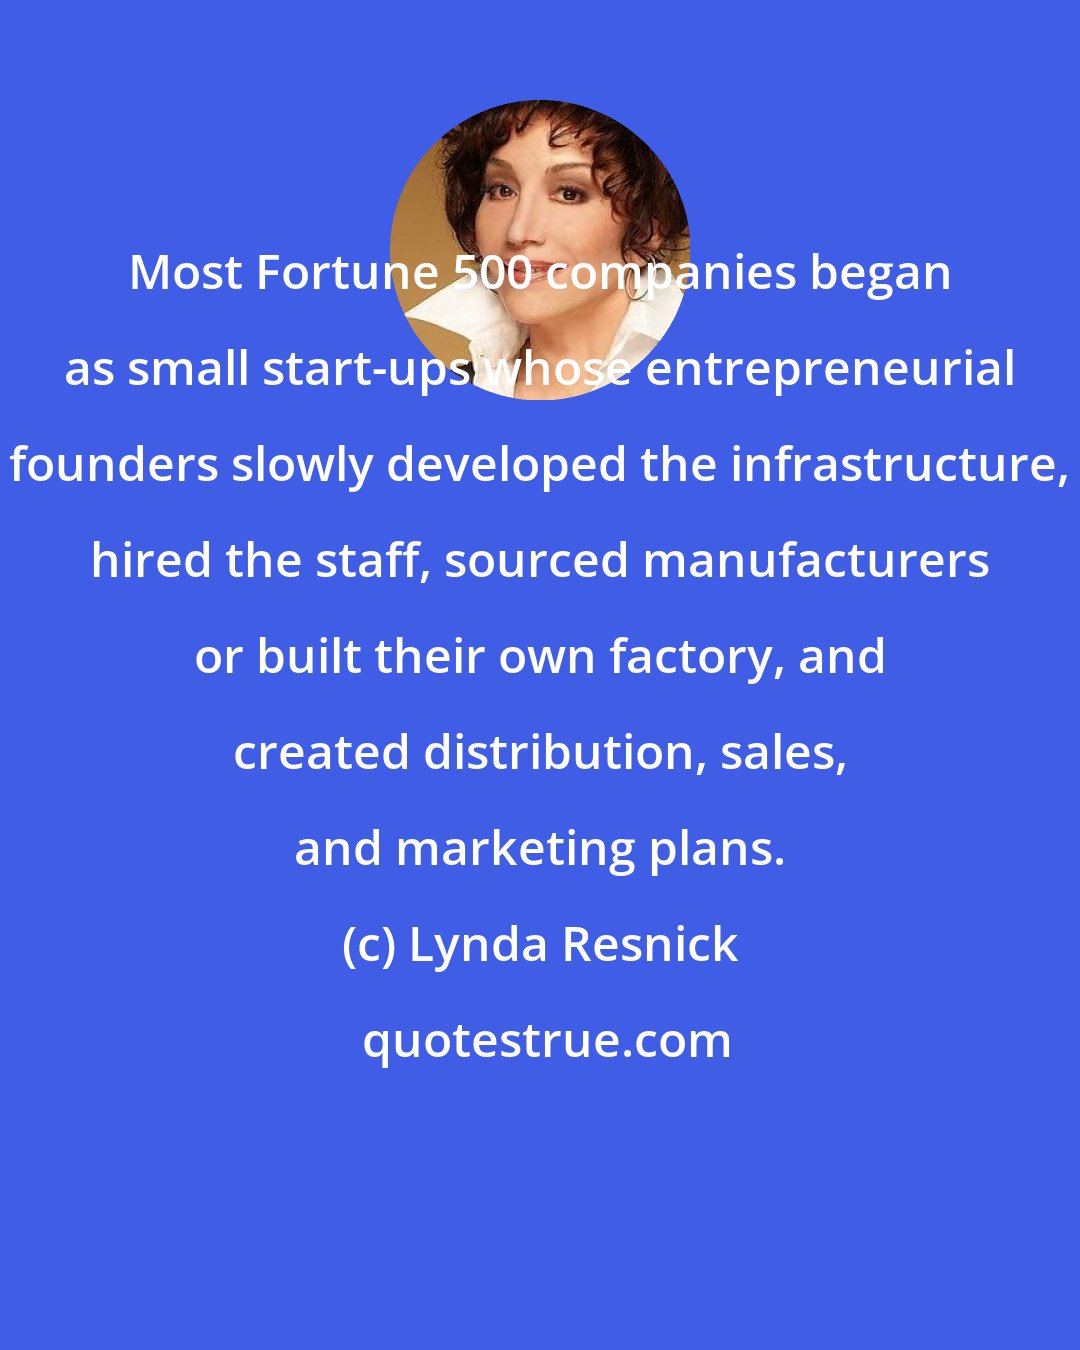 Lynda Resnick: Most Fortune 500 companies began as small start-ups whose entrepreneurial founders slowly developed the infrastructure, hired the staff, sourced manufacturers or built their own factory, and created distribution, sales, and marketing plans.